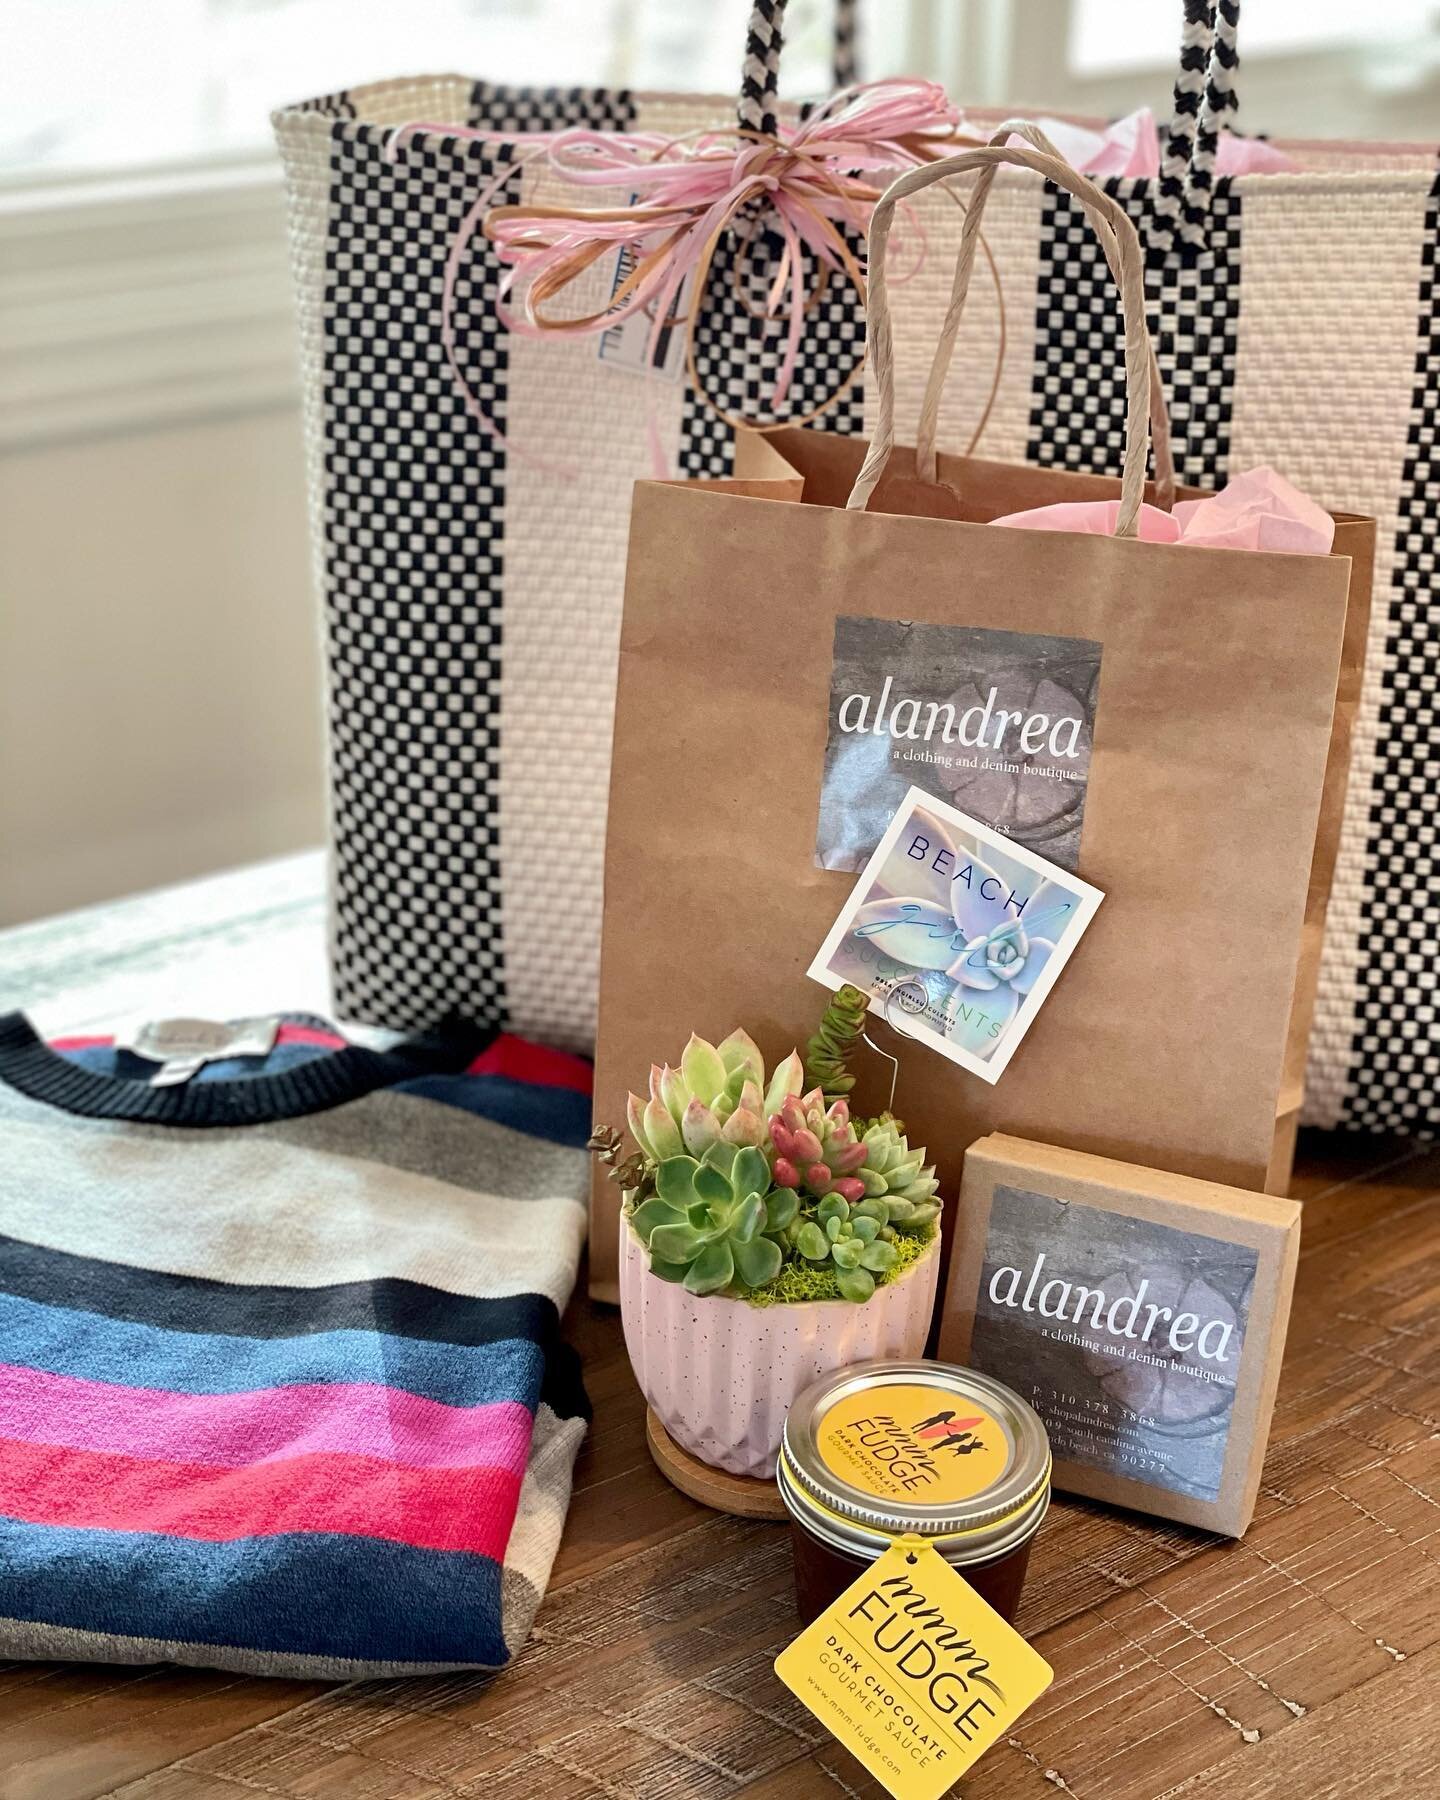 Showered with small business love this weekend! 
@alandreaboutique 
@beachgirlsucculents 
@mmmfudge_yum 

#shopsmall
#supportlocal
#smallbusiness 
#southbay
#southbaystrong
#mompreneurs
#TaylorDigitalMarketing
#Alandrea
#BeachGirlSucculents
#mmmFudge